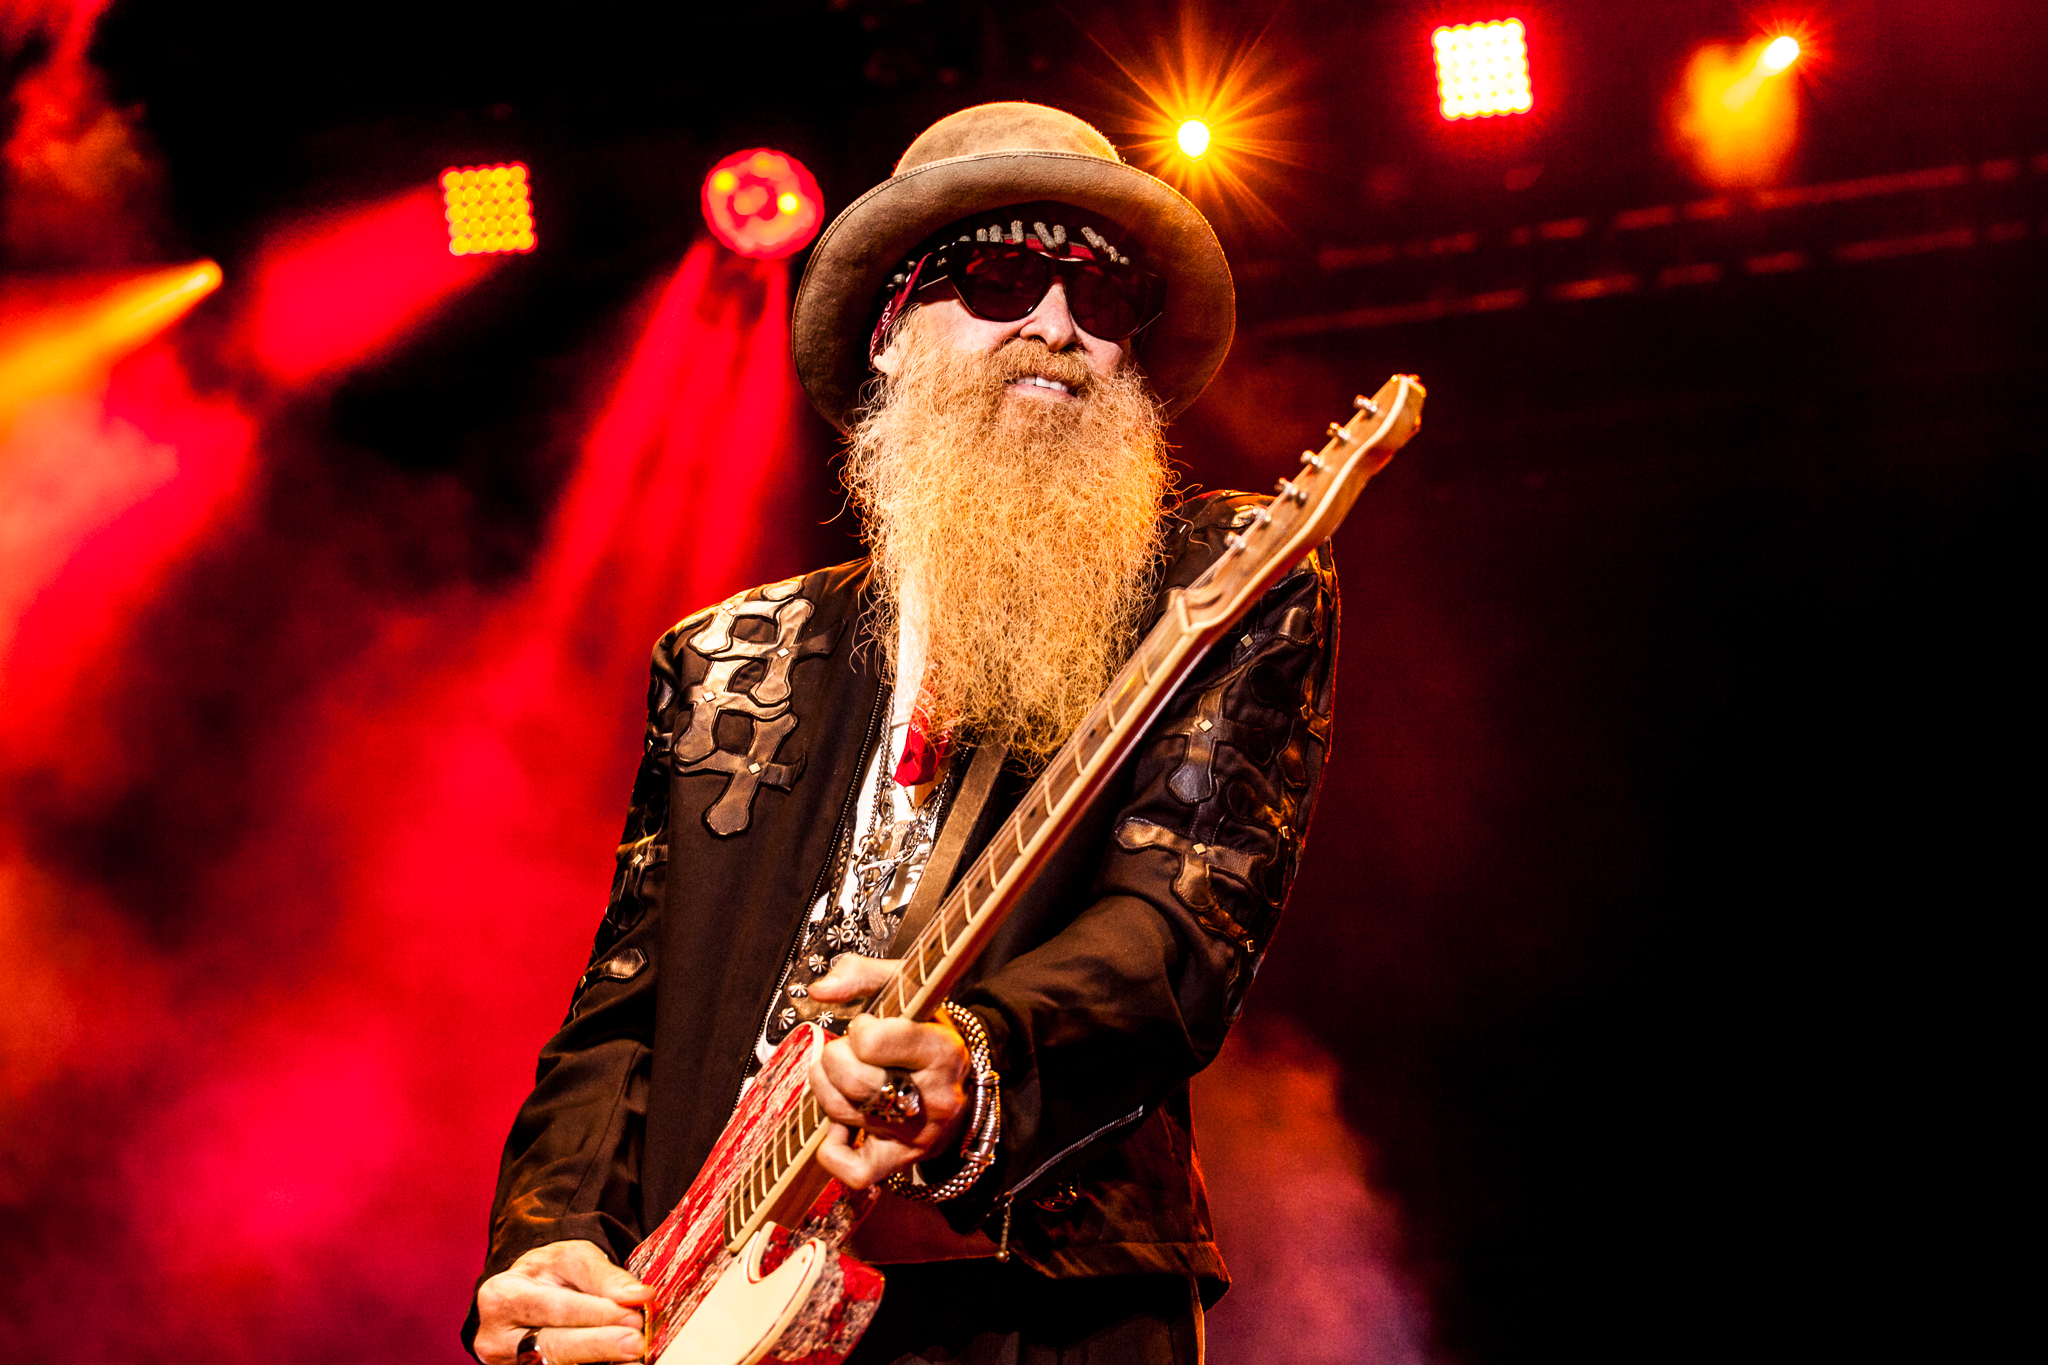 EXCLUSIVE: Billy Gibbons Talks First Solo Tour, New ZZ Top Music, More